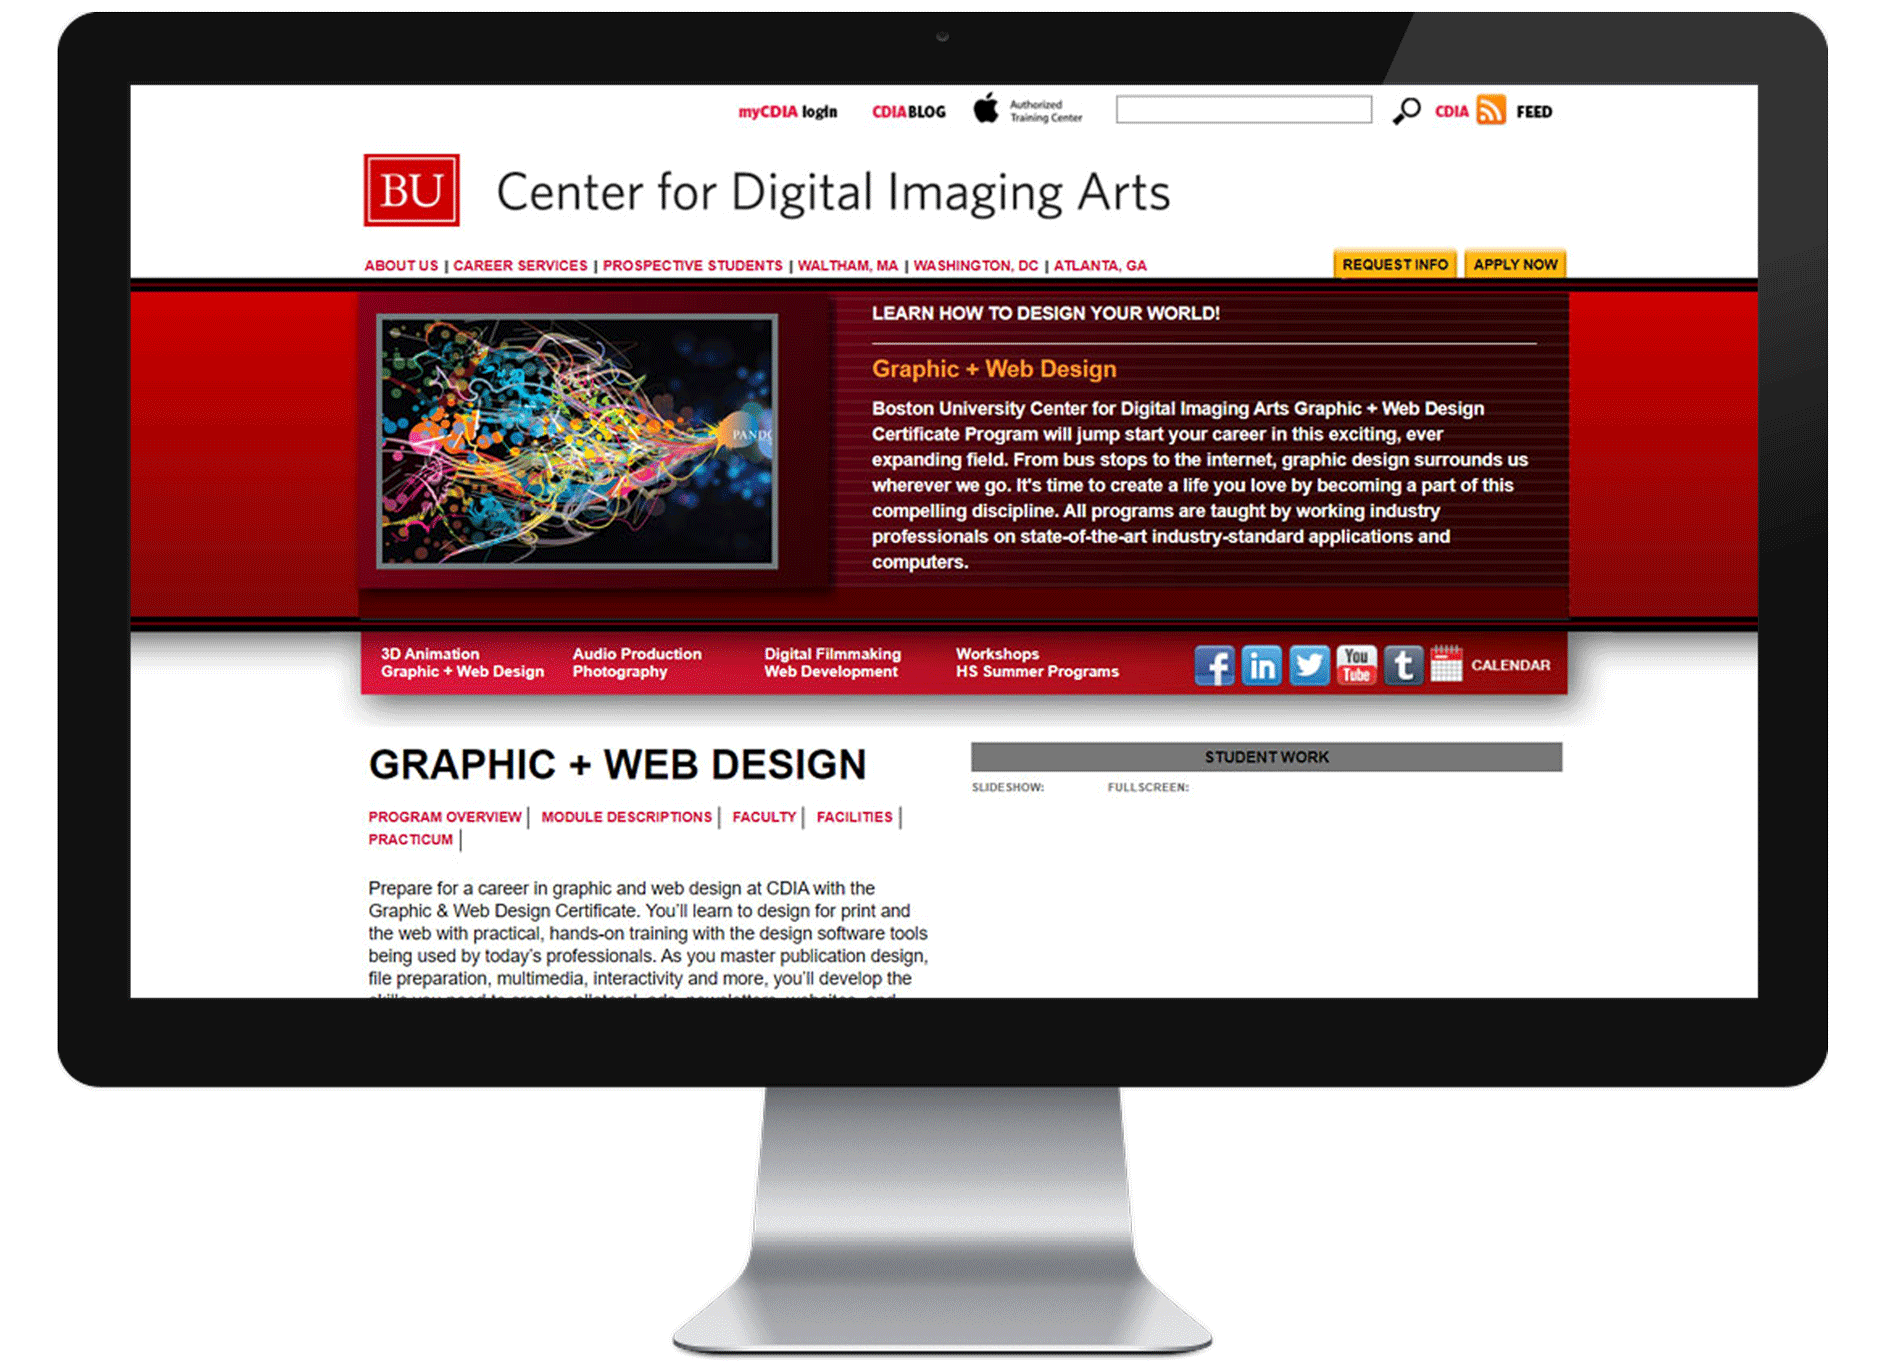 Boston University Center for Digital Imaging Arts final launch design department page on monitor